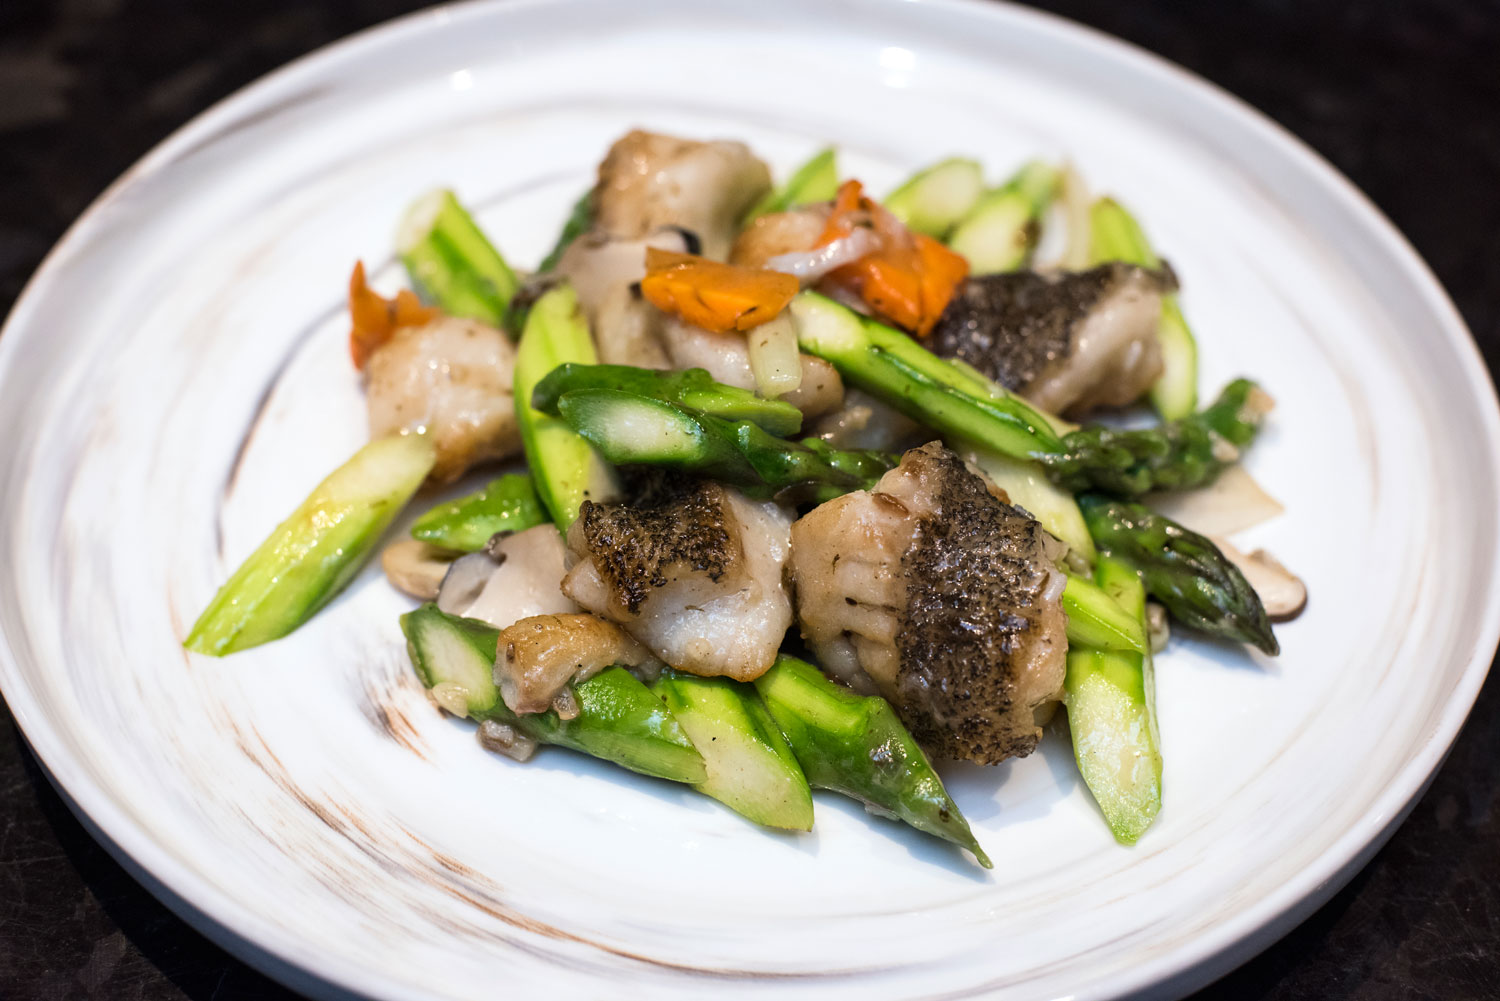 Olive vegetable stir fried with fresh pearl grouper Fillet is a dish well received by diners of all ages. 